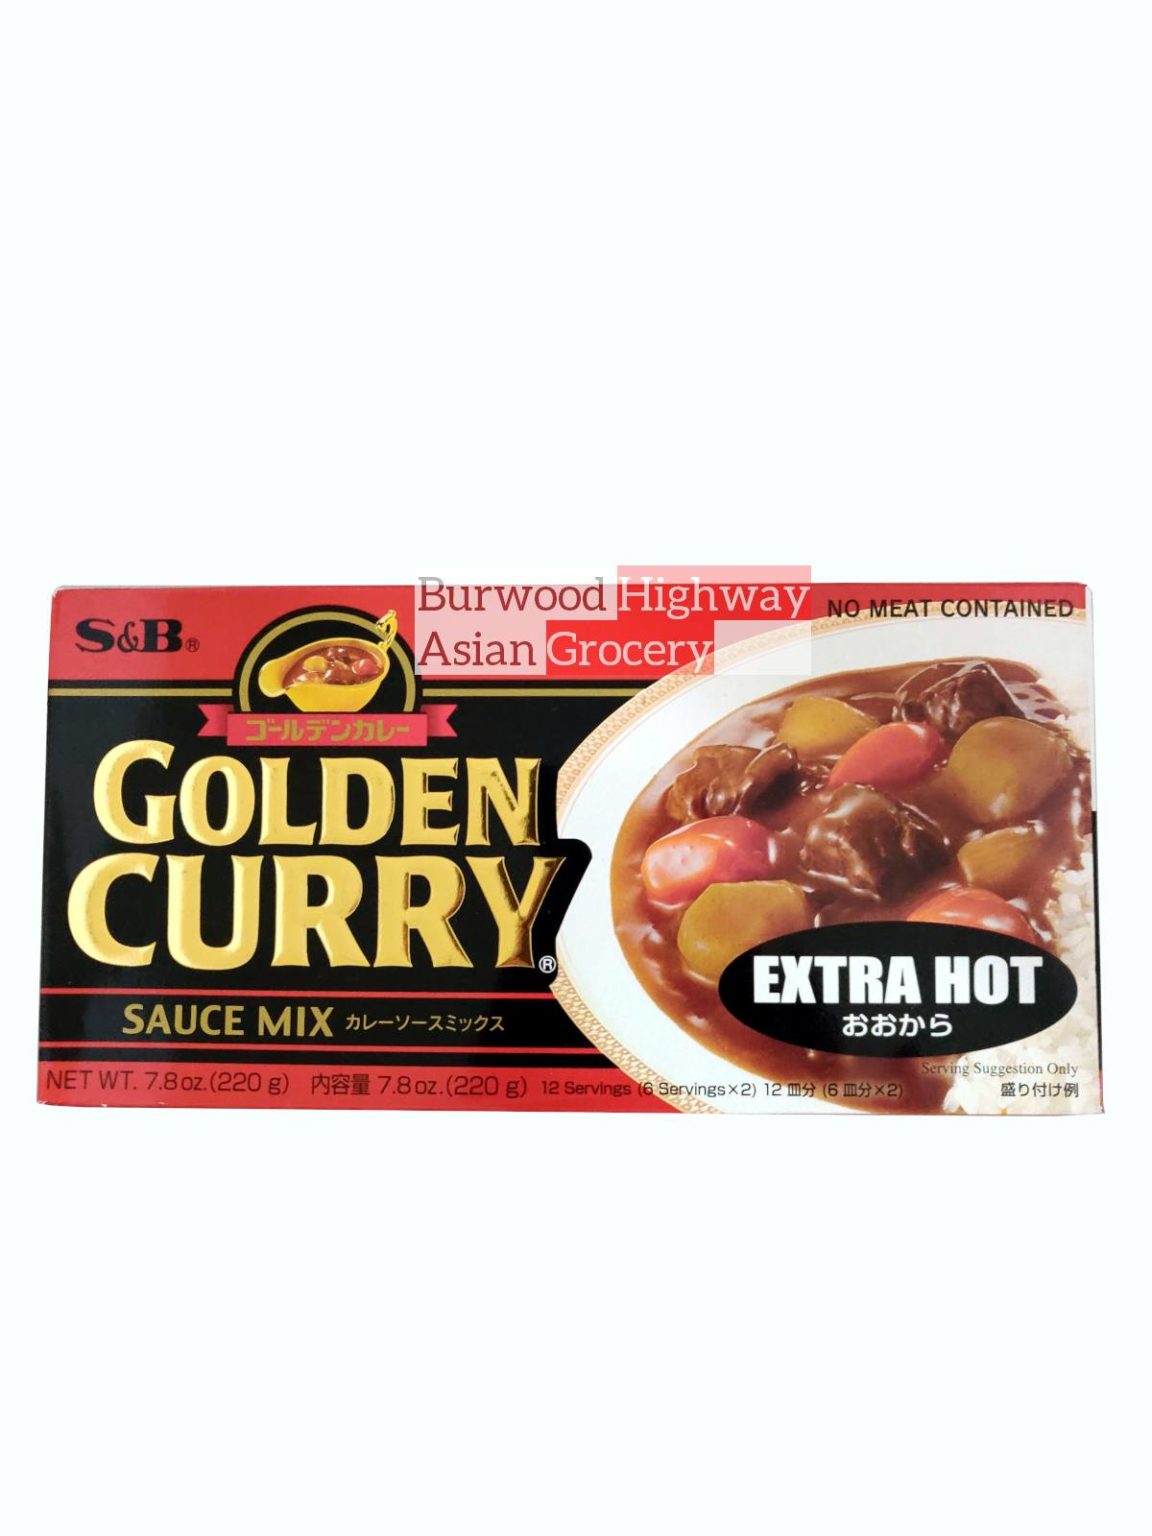 S&B Golden Curry Mix (Extra Hot) 220g - Burwood Highway Asian Grocery